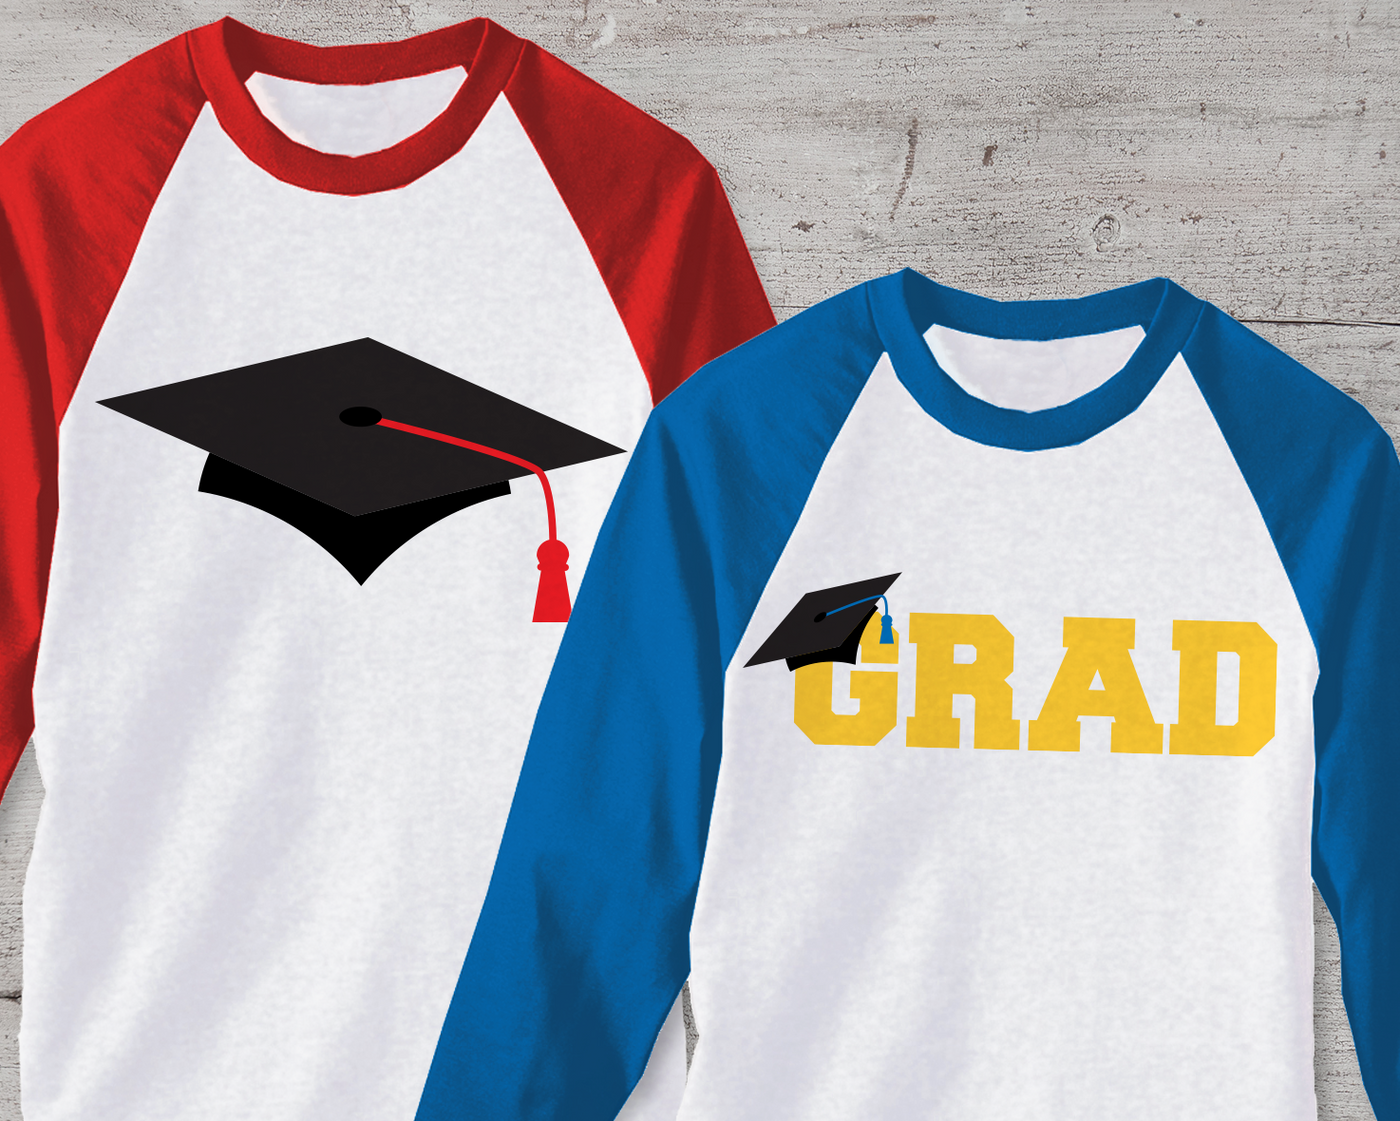 Two raglan tees. One has a graduation cap design, the other says "GRAD" and has a cap hanging off of the G.